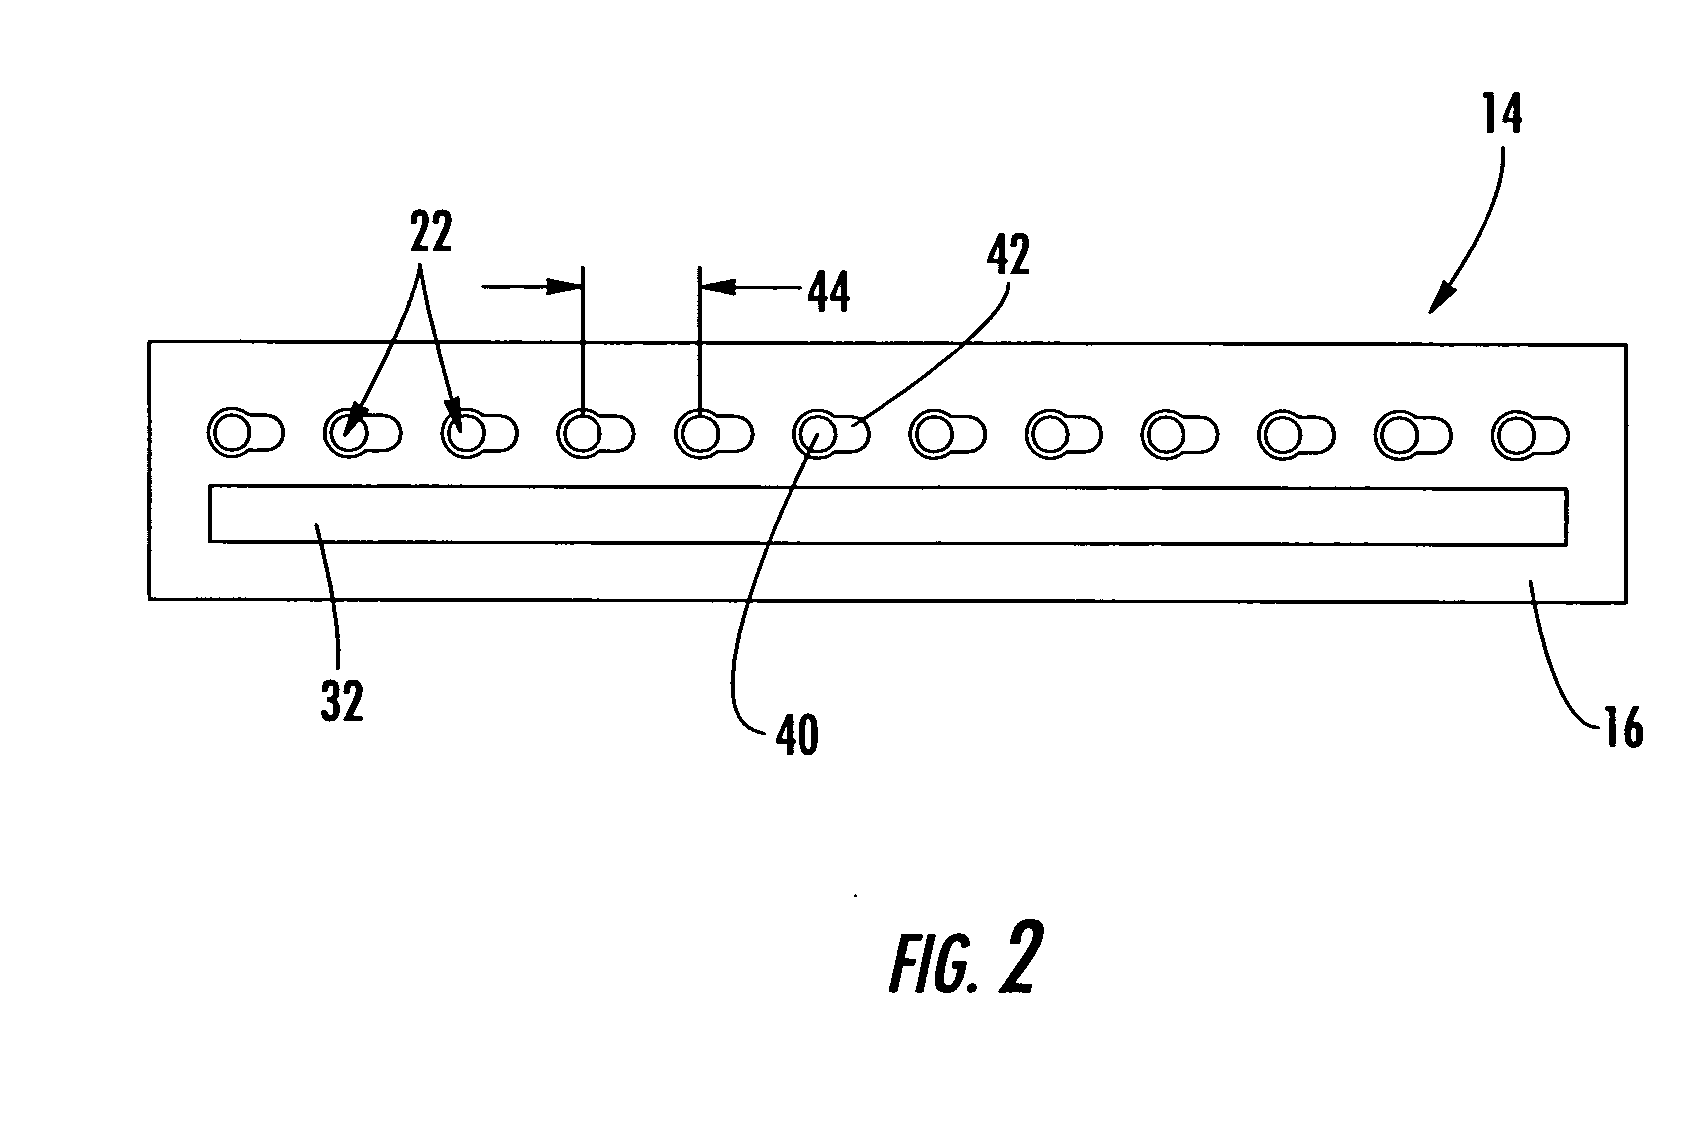 Arrayed receiver optical sub-assembly including layered ceramic substrate for alleviation of cross-talk and noise between channels